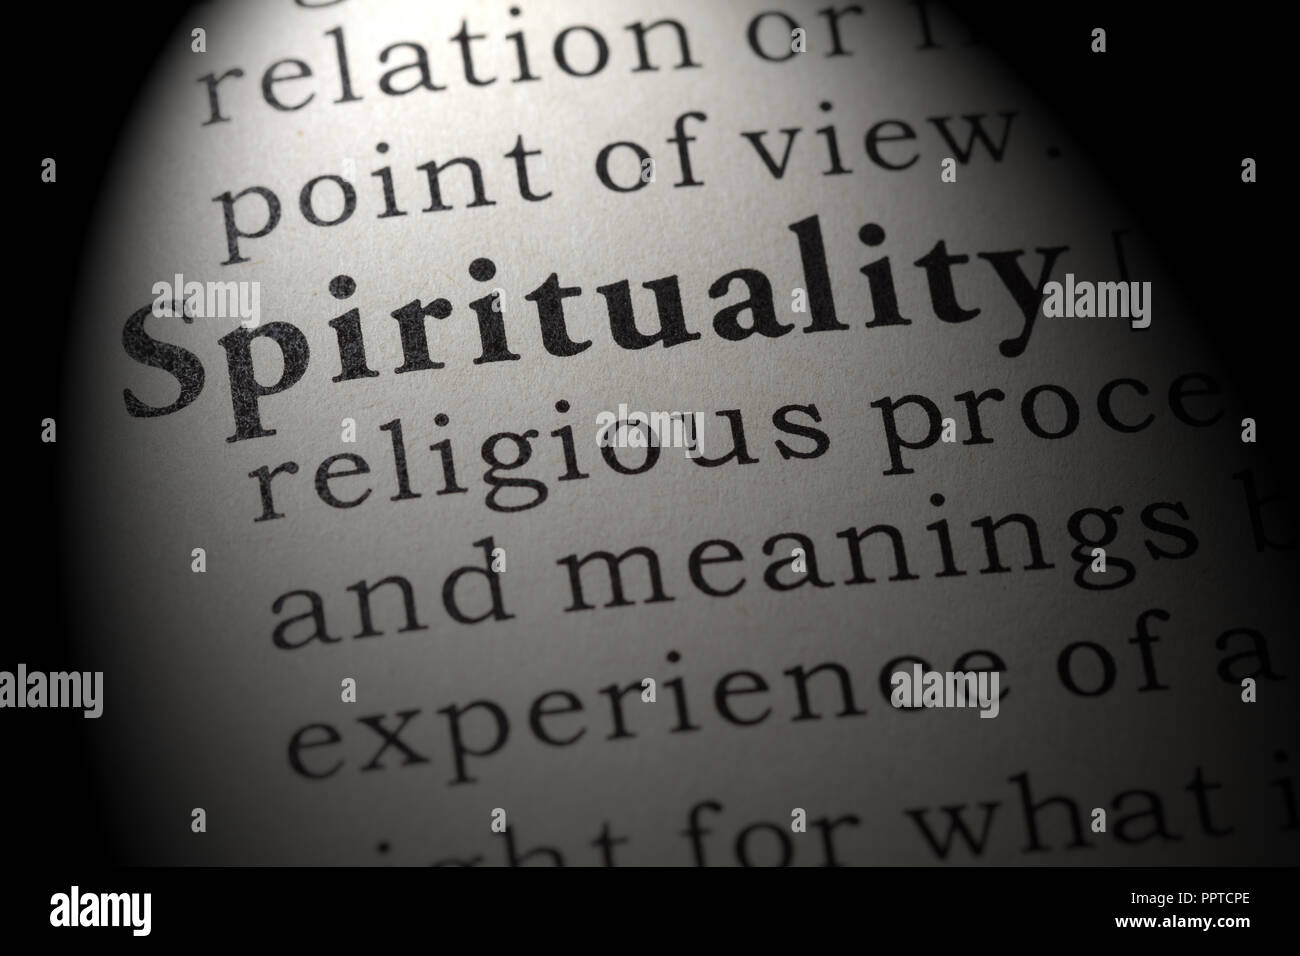 Fake Dictionary, Dictionary definition of the word spirituality. including key descriptive words. Stock Photo